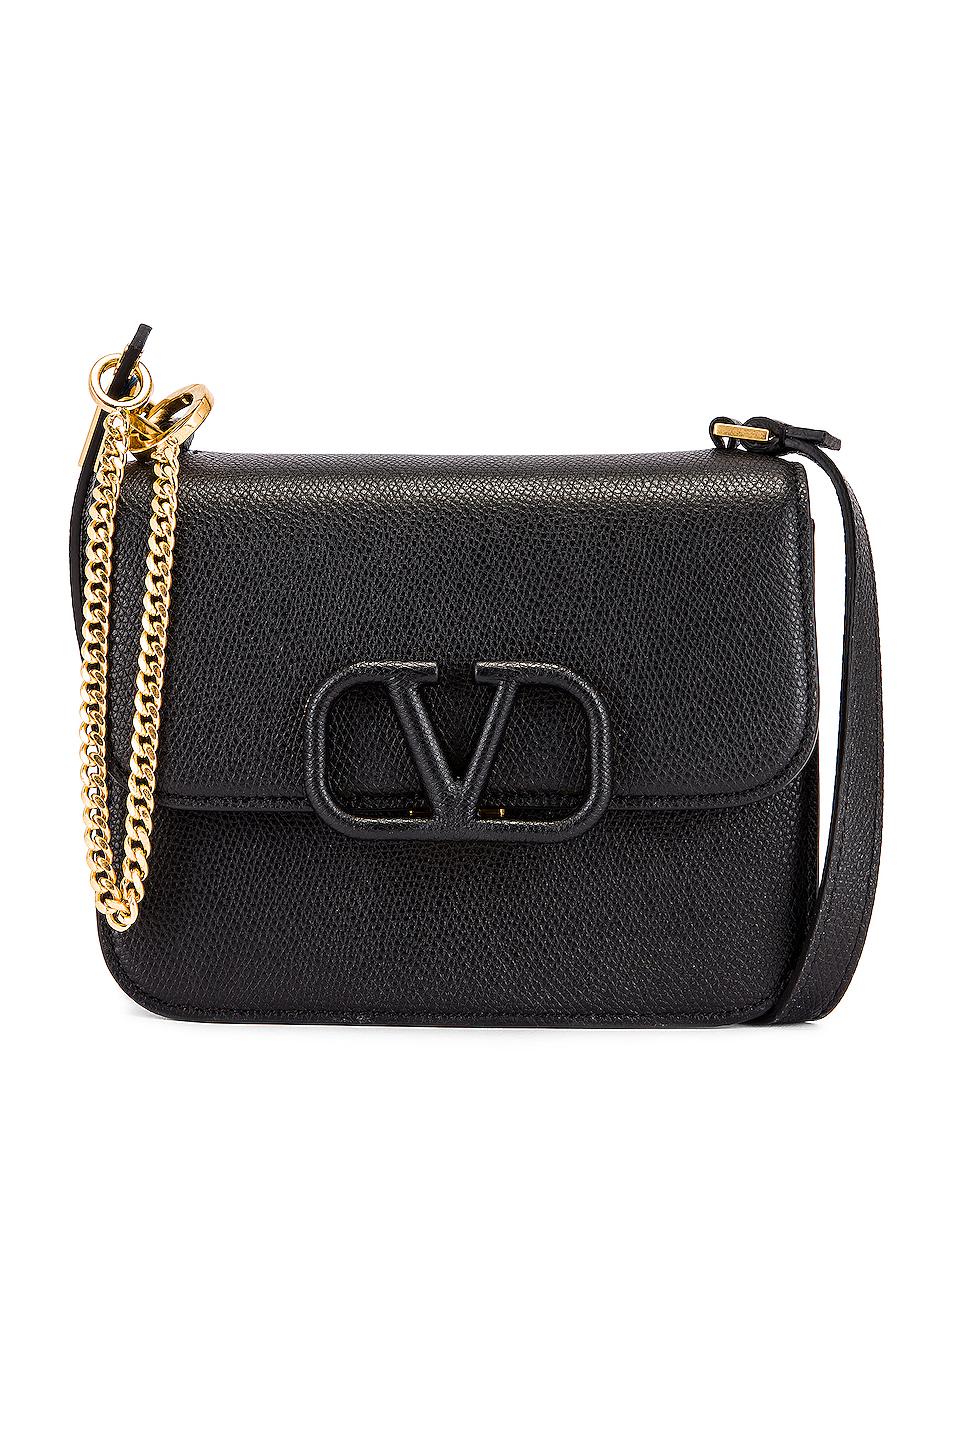 Valentino Leather Small Vsling Shoulder Bag in Nero (Black) - Lyst